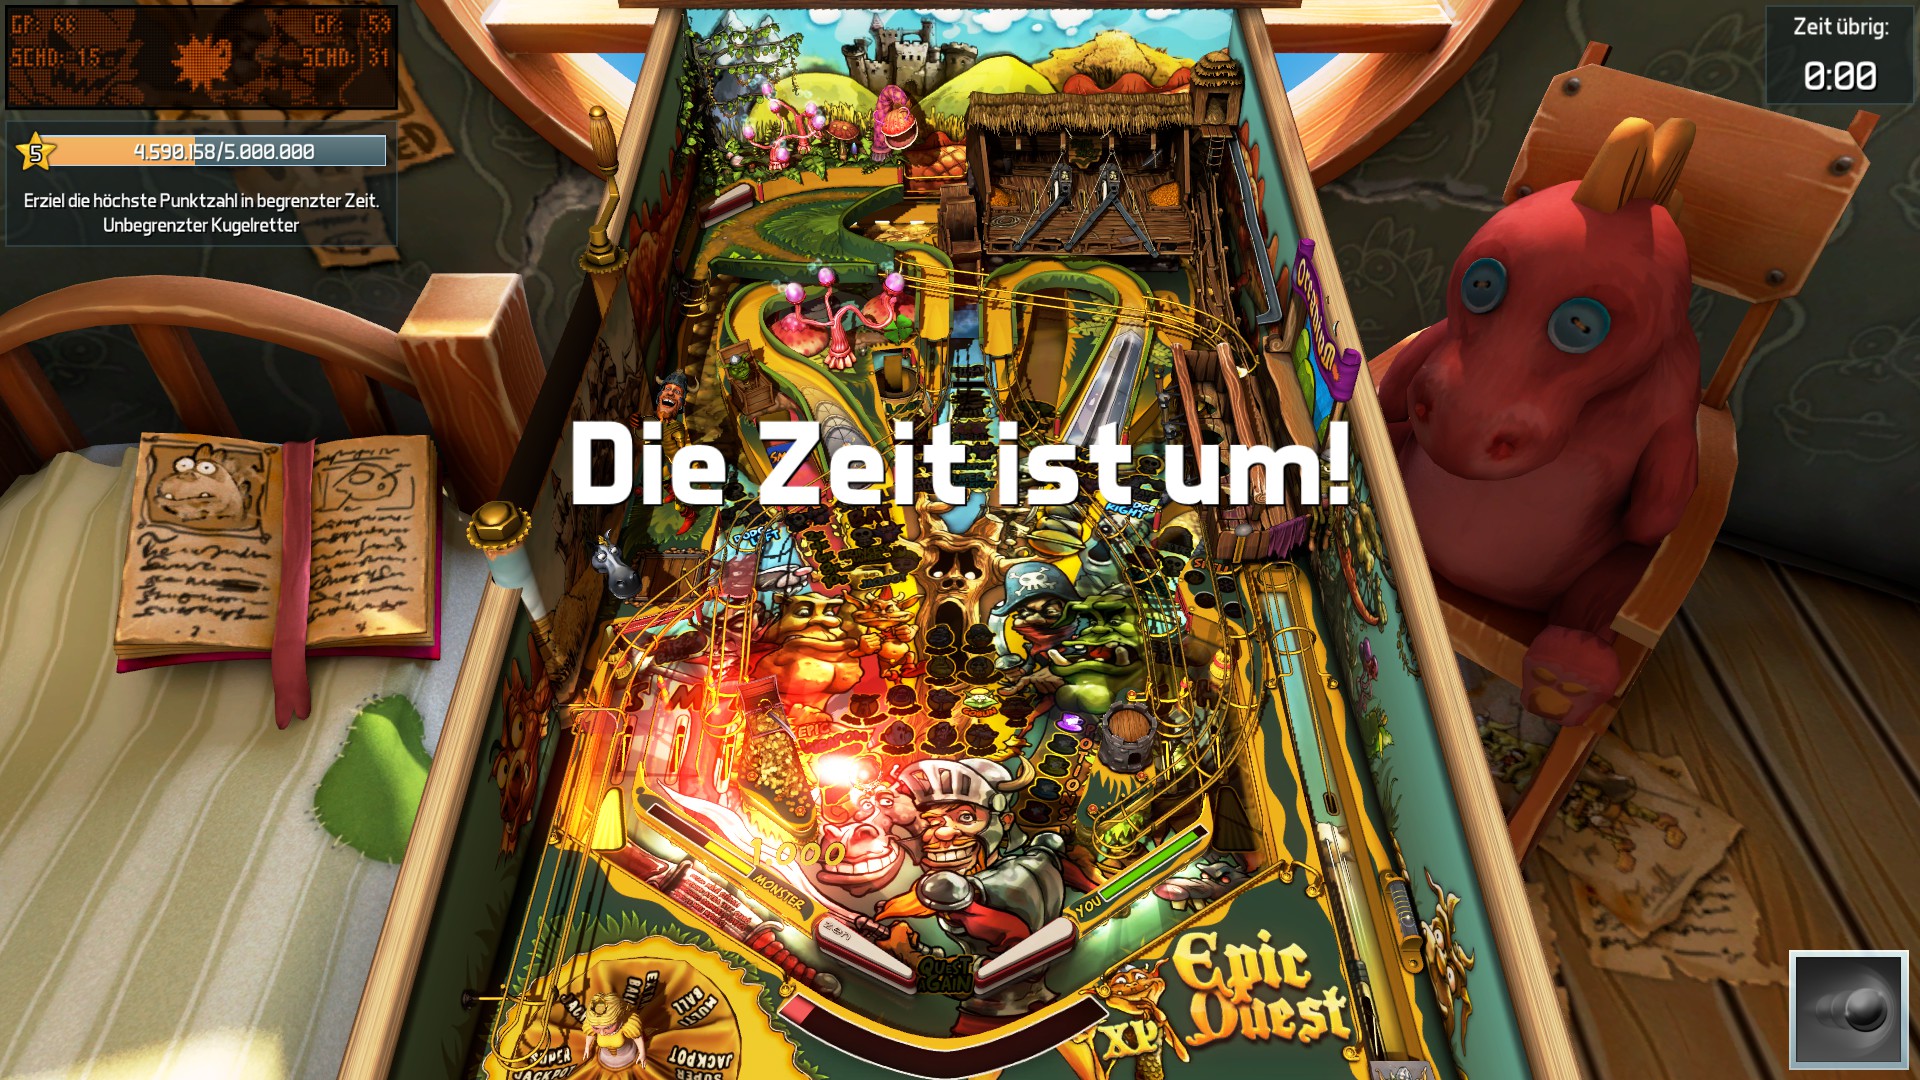 e2e4: Pinball FX3: Epic Quest [5 Minute] (PC) 4,590,158 points on 2022-06-03 23:25:33